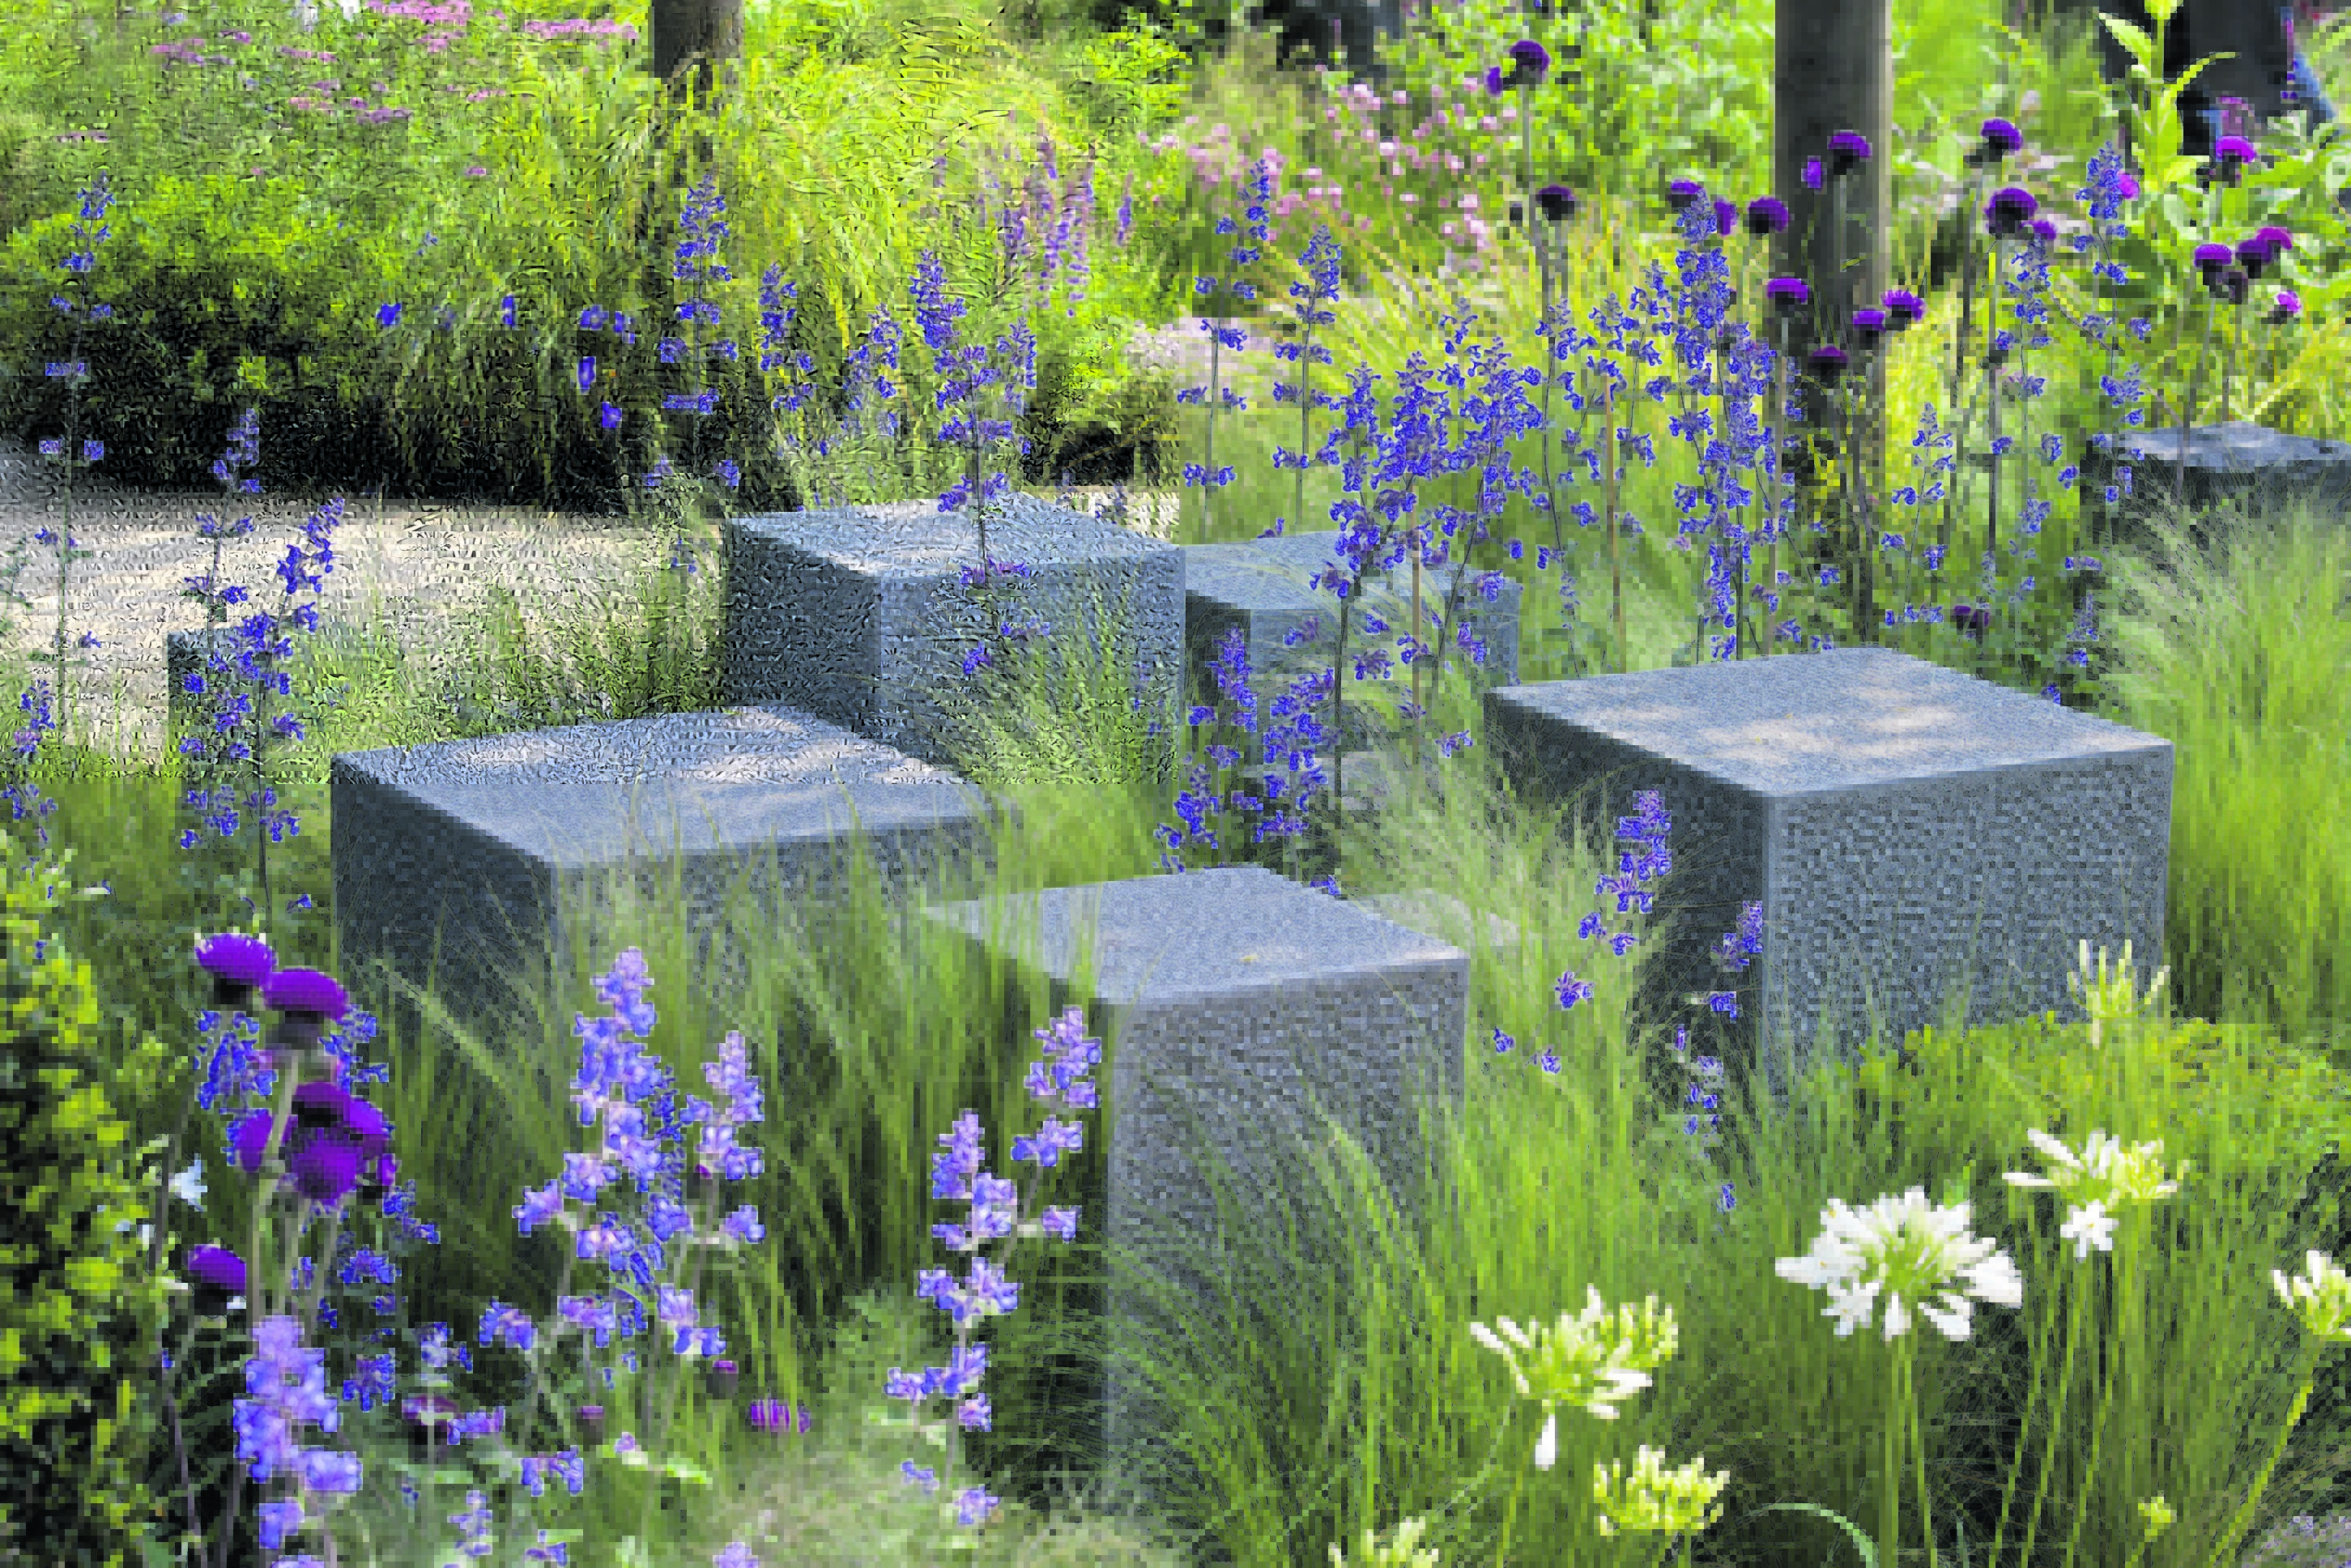 The Hope on the Horizon garden, sponsored by David Brownlow and designed by Matt Keightley, at the RHS Chelsea Flower Show 2014.